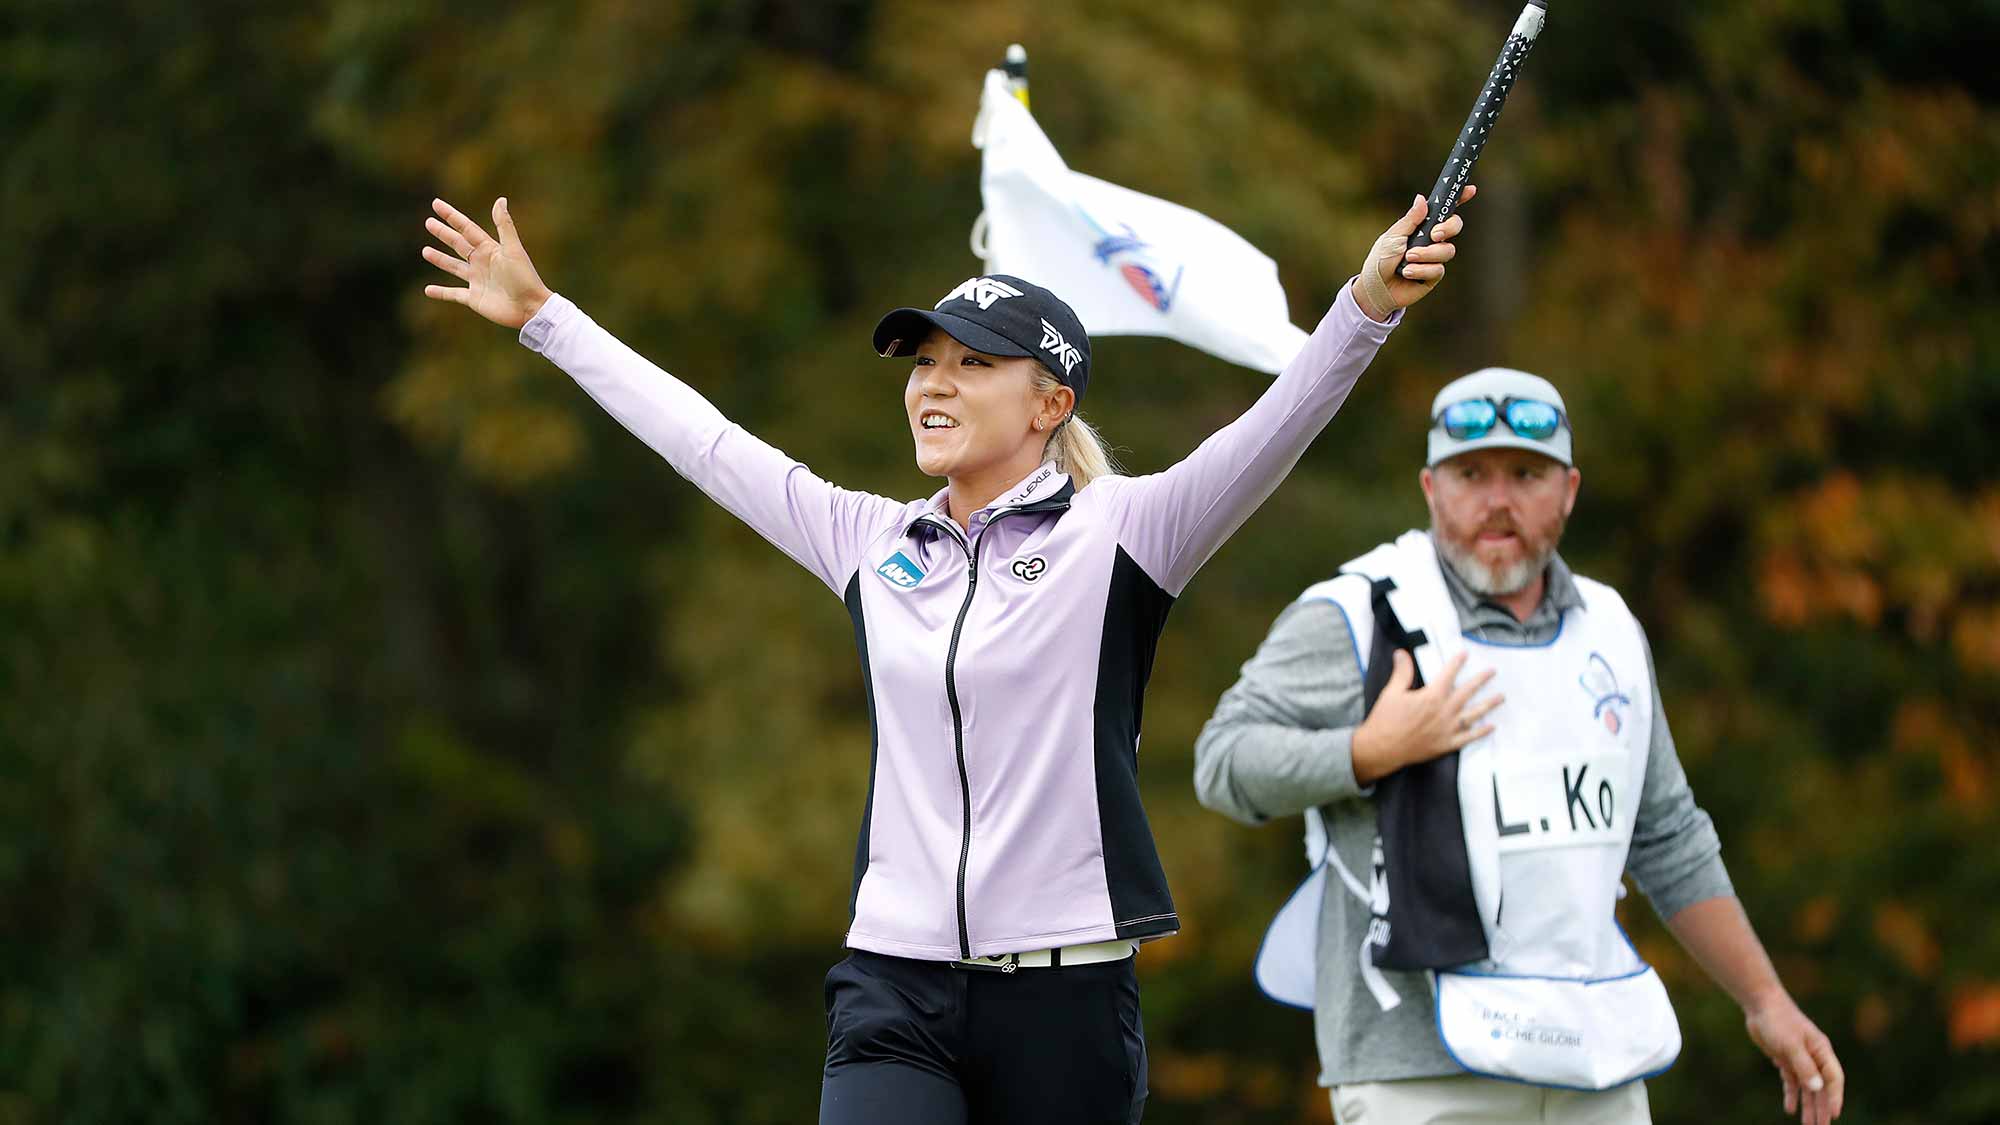 Lydia Ko of New Zealand celebrates on the 18th green after the first round of the TOTO Japan Classic at Seta Golf Course on November 02, 2018 in Otsu, Shiga, Japan